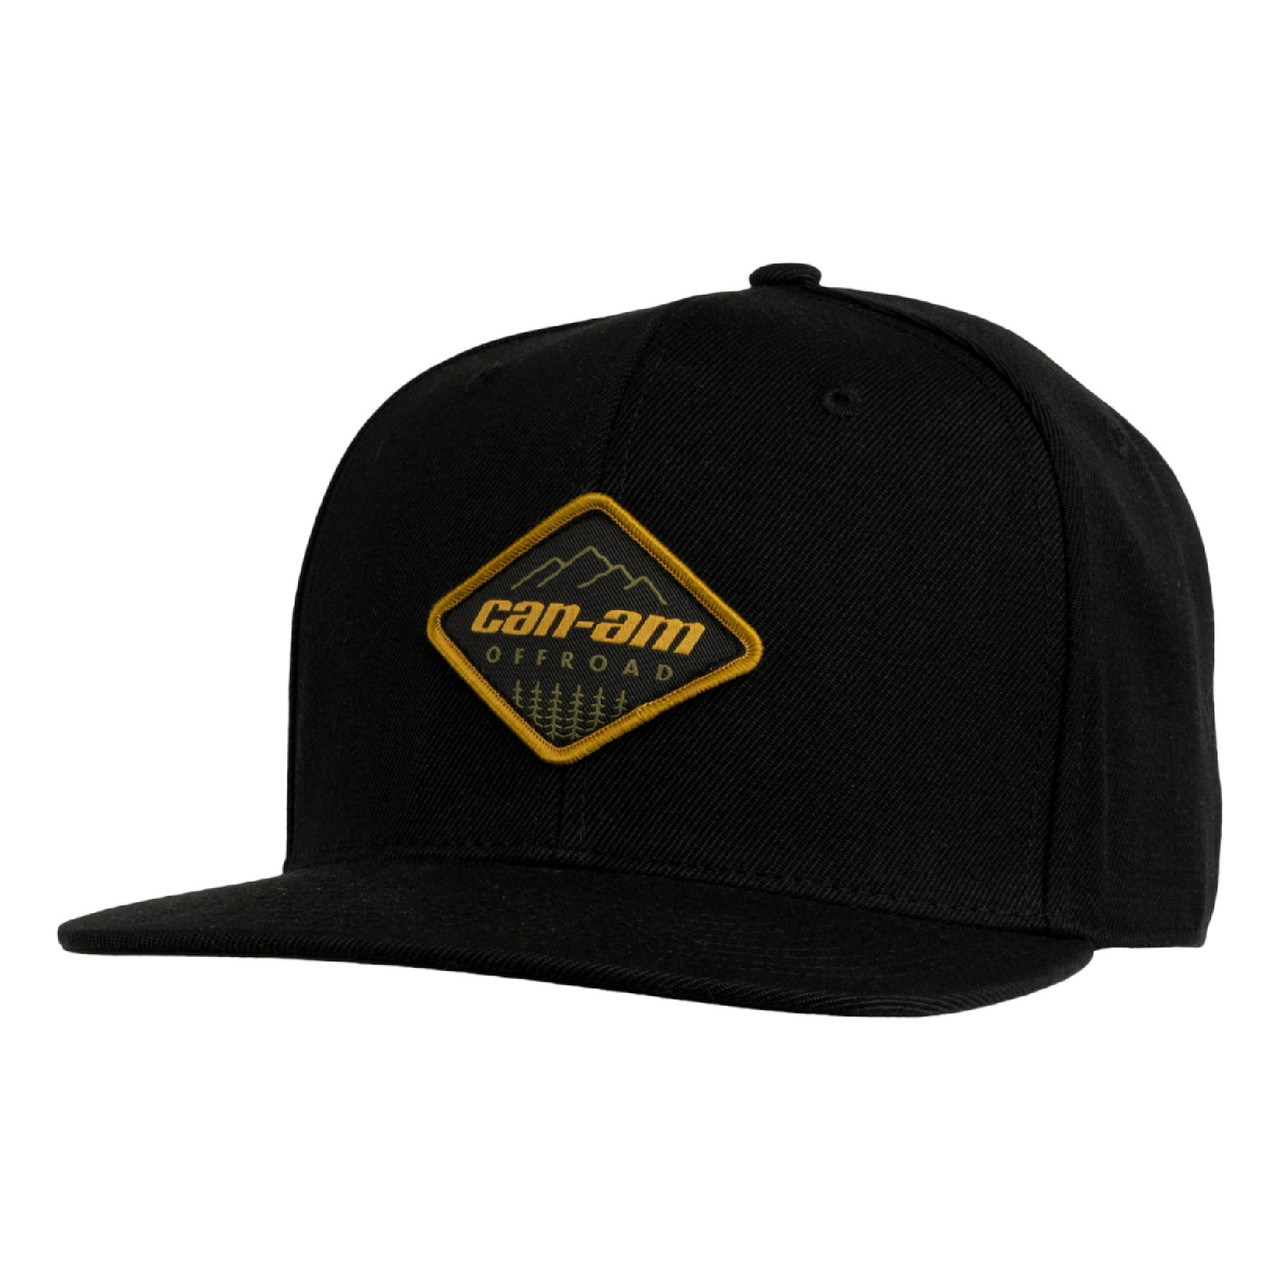 Can-Am New OEM, Men's Onesize Branded Snapback Flat Cap Off-Road, 4547720090